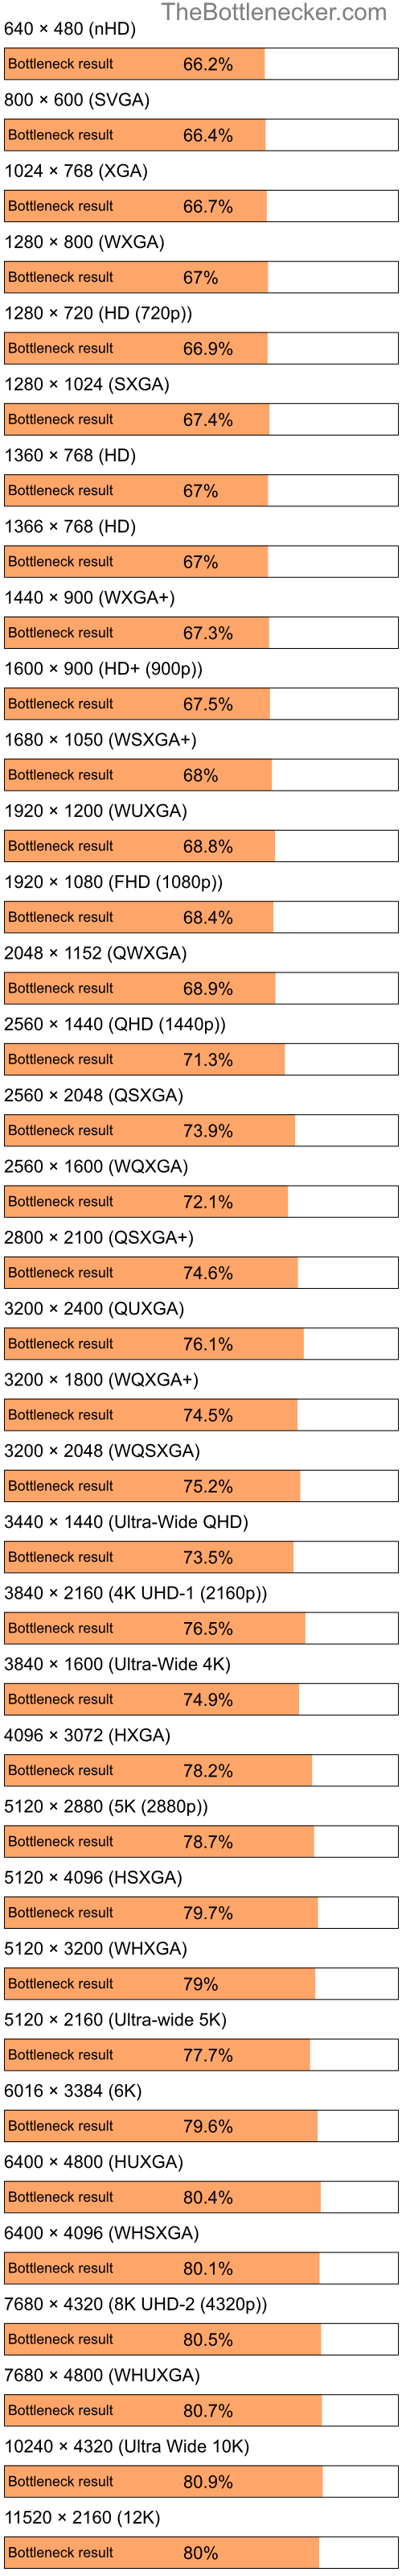 Bottleneck results by resolution for Intel Pentium 4 and NVIDIA GeForce 6200 in Processor Intense Tasks